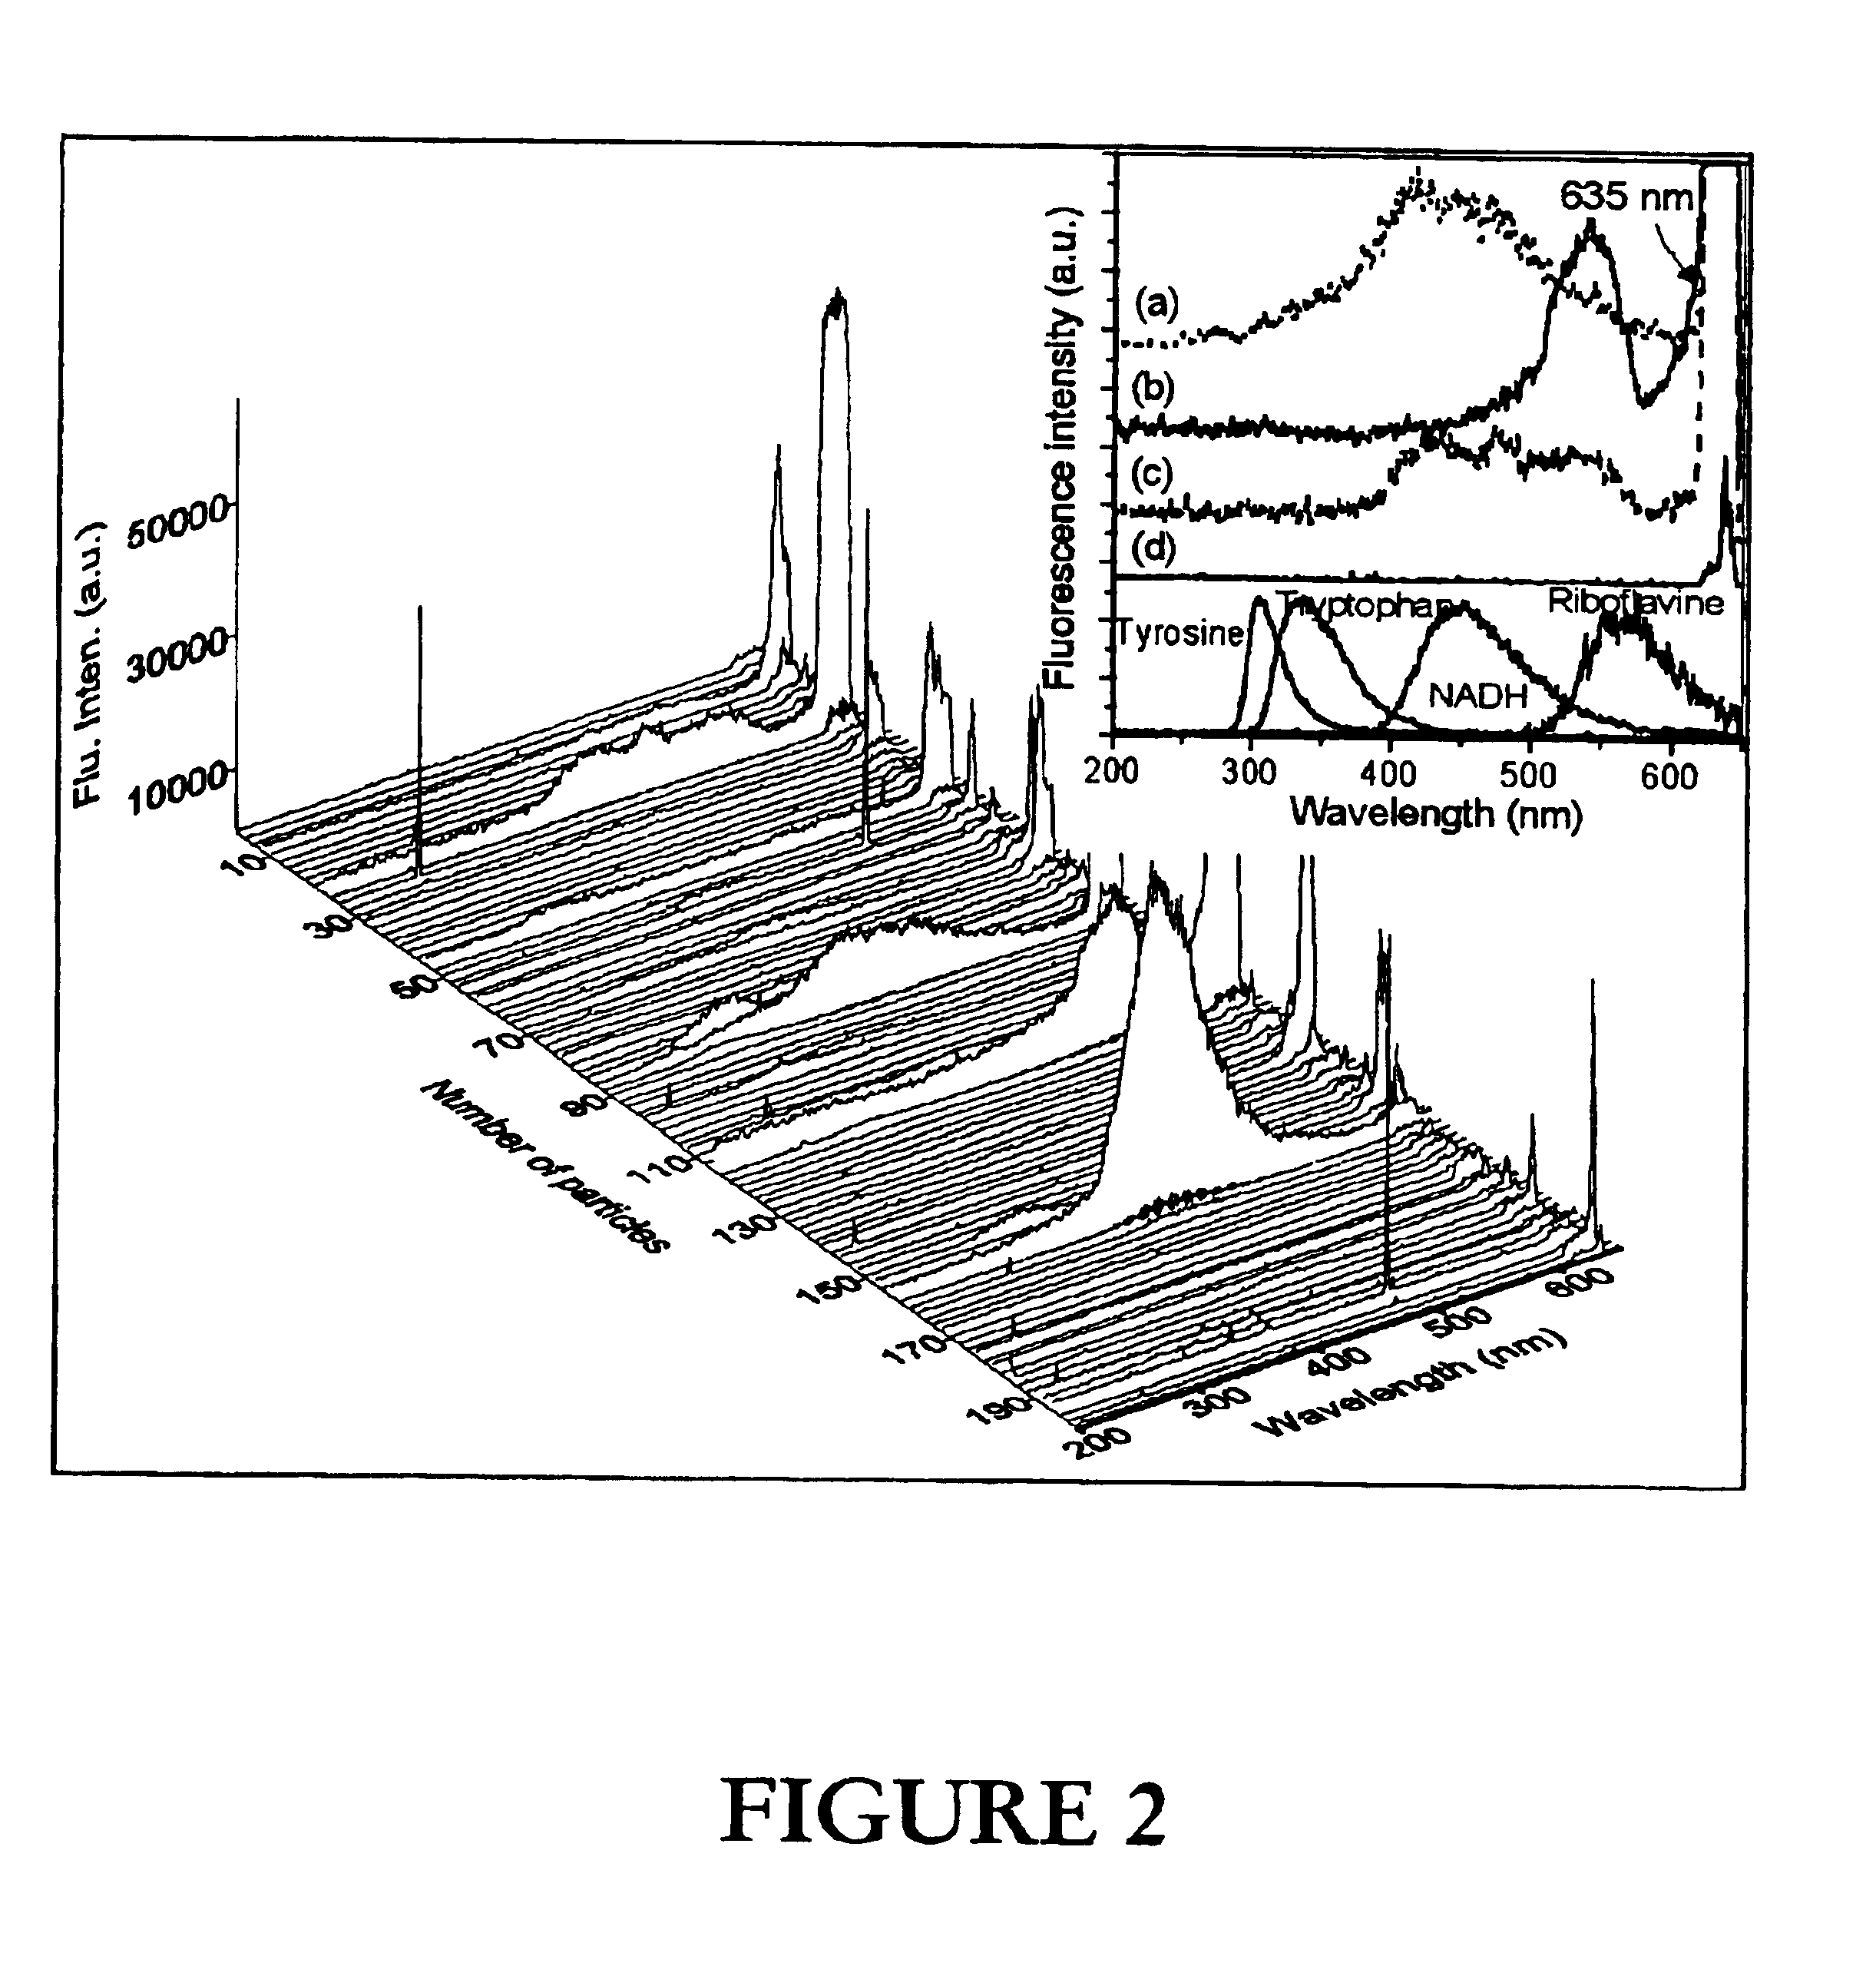 Method and instrumentation for measuring fluorescence spectra of individual airborne particles sampled from ambient air